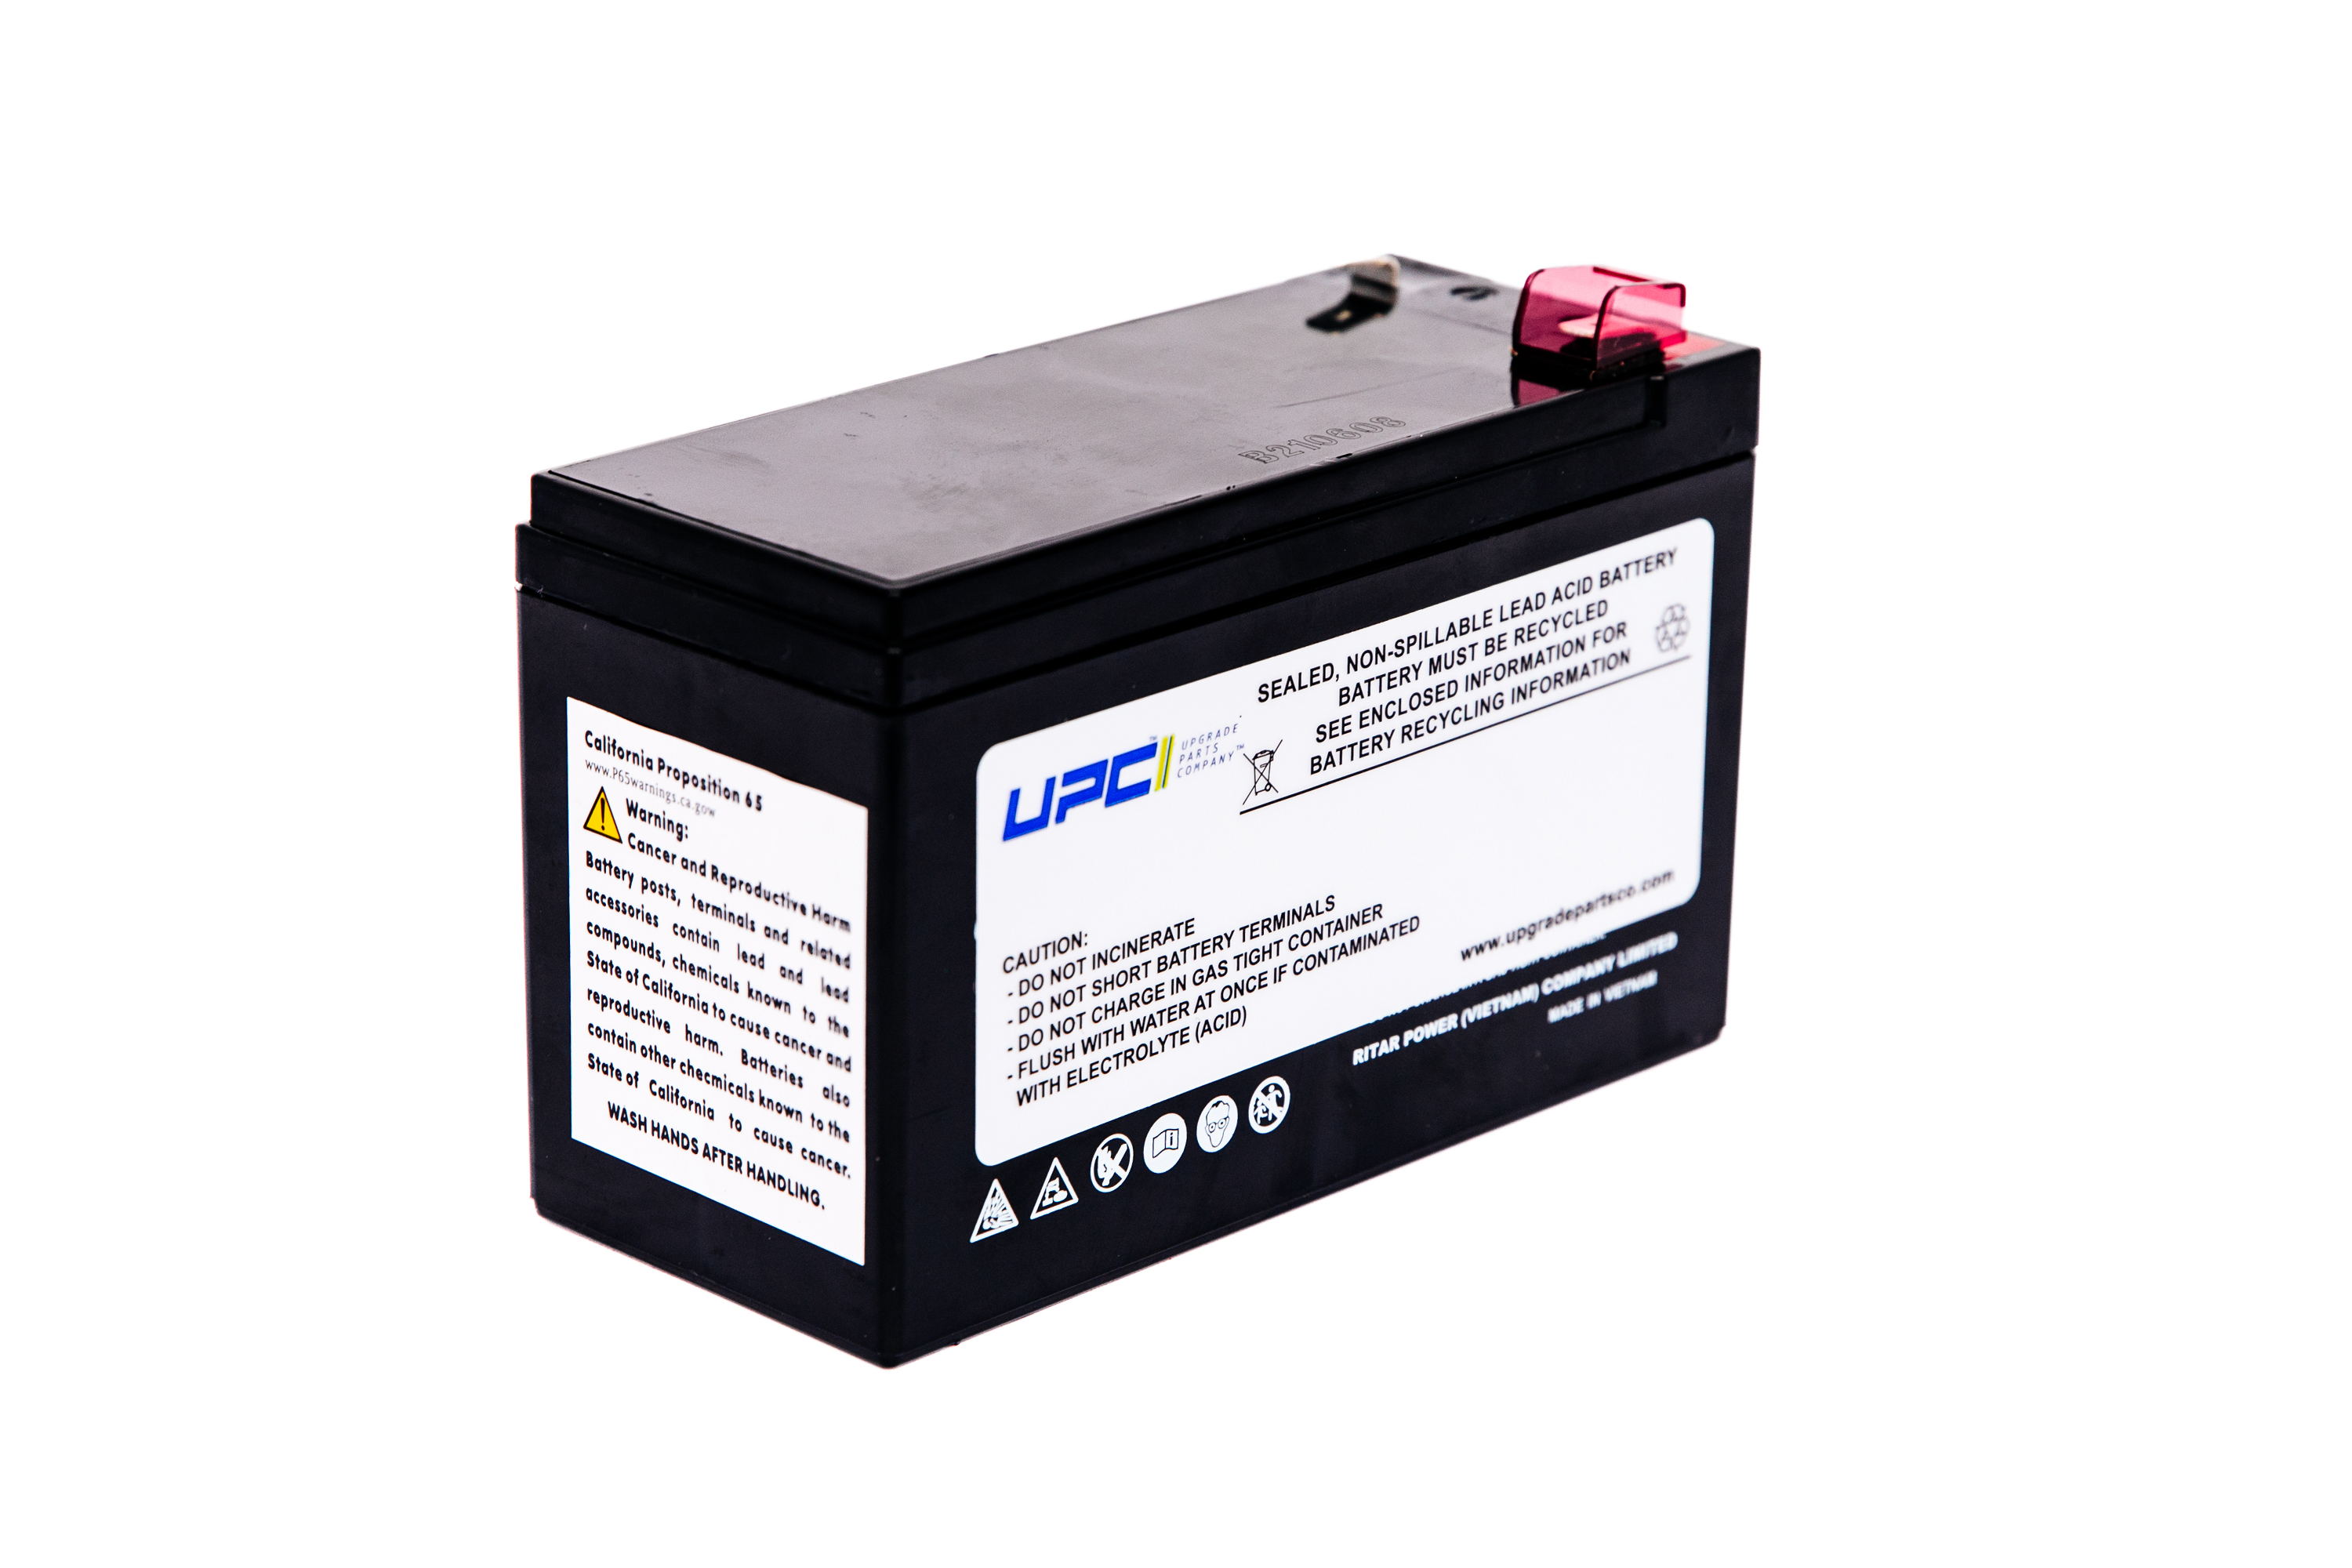 APCRBC114-UPC Replacement Battery for UPS Models BE450G, BN4001 - image 3 of 3